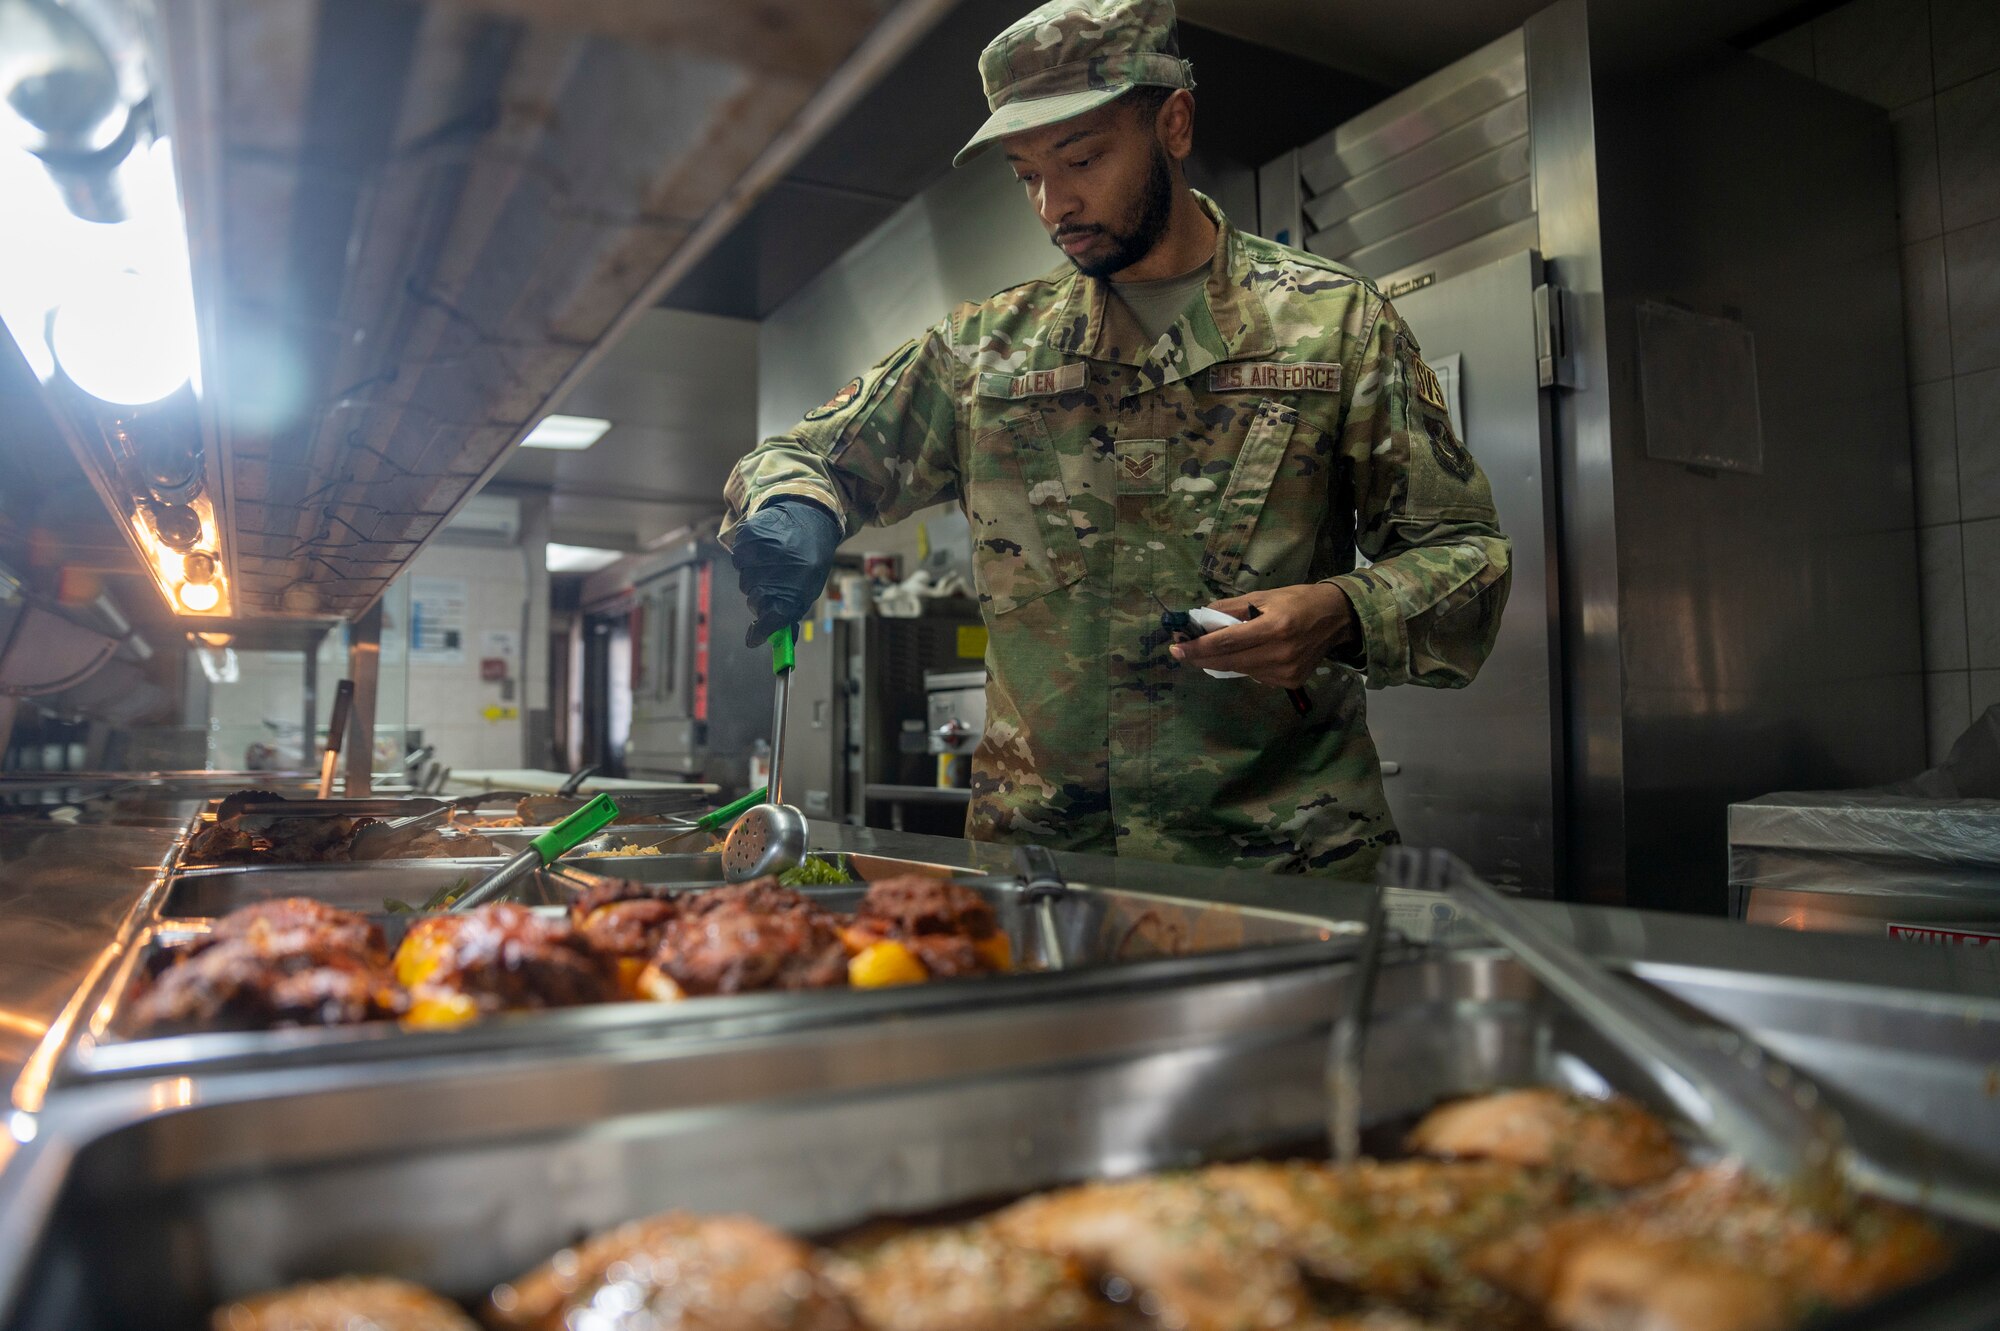 U.S. Air Force Senior Airman Trevor Allen, 51st Force Support Squadron food services journeyman, tests food temperature at Osan Air Base, Republic of Korea, Jan. 8, 2024. Temperature testing, conducted by the 51st FSS, is a crucial safety procedure to verify that all food is adequately cooked and complies with safety standards for Airmen. (U.S. Air Force photo by Senior Airman Trevor Gordnier)